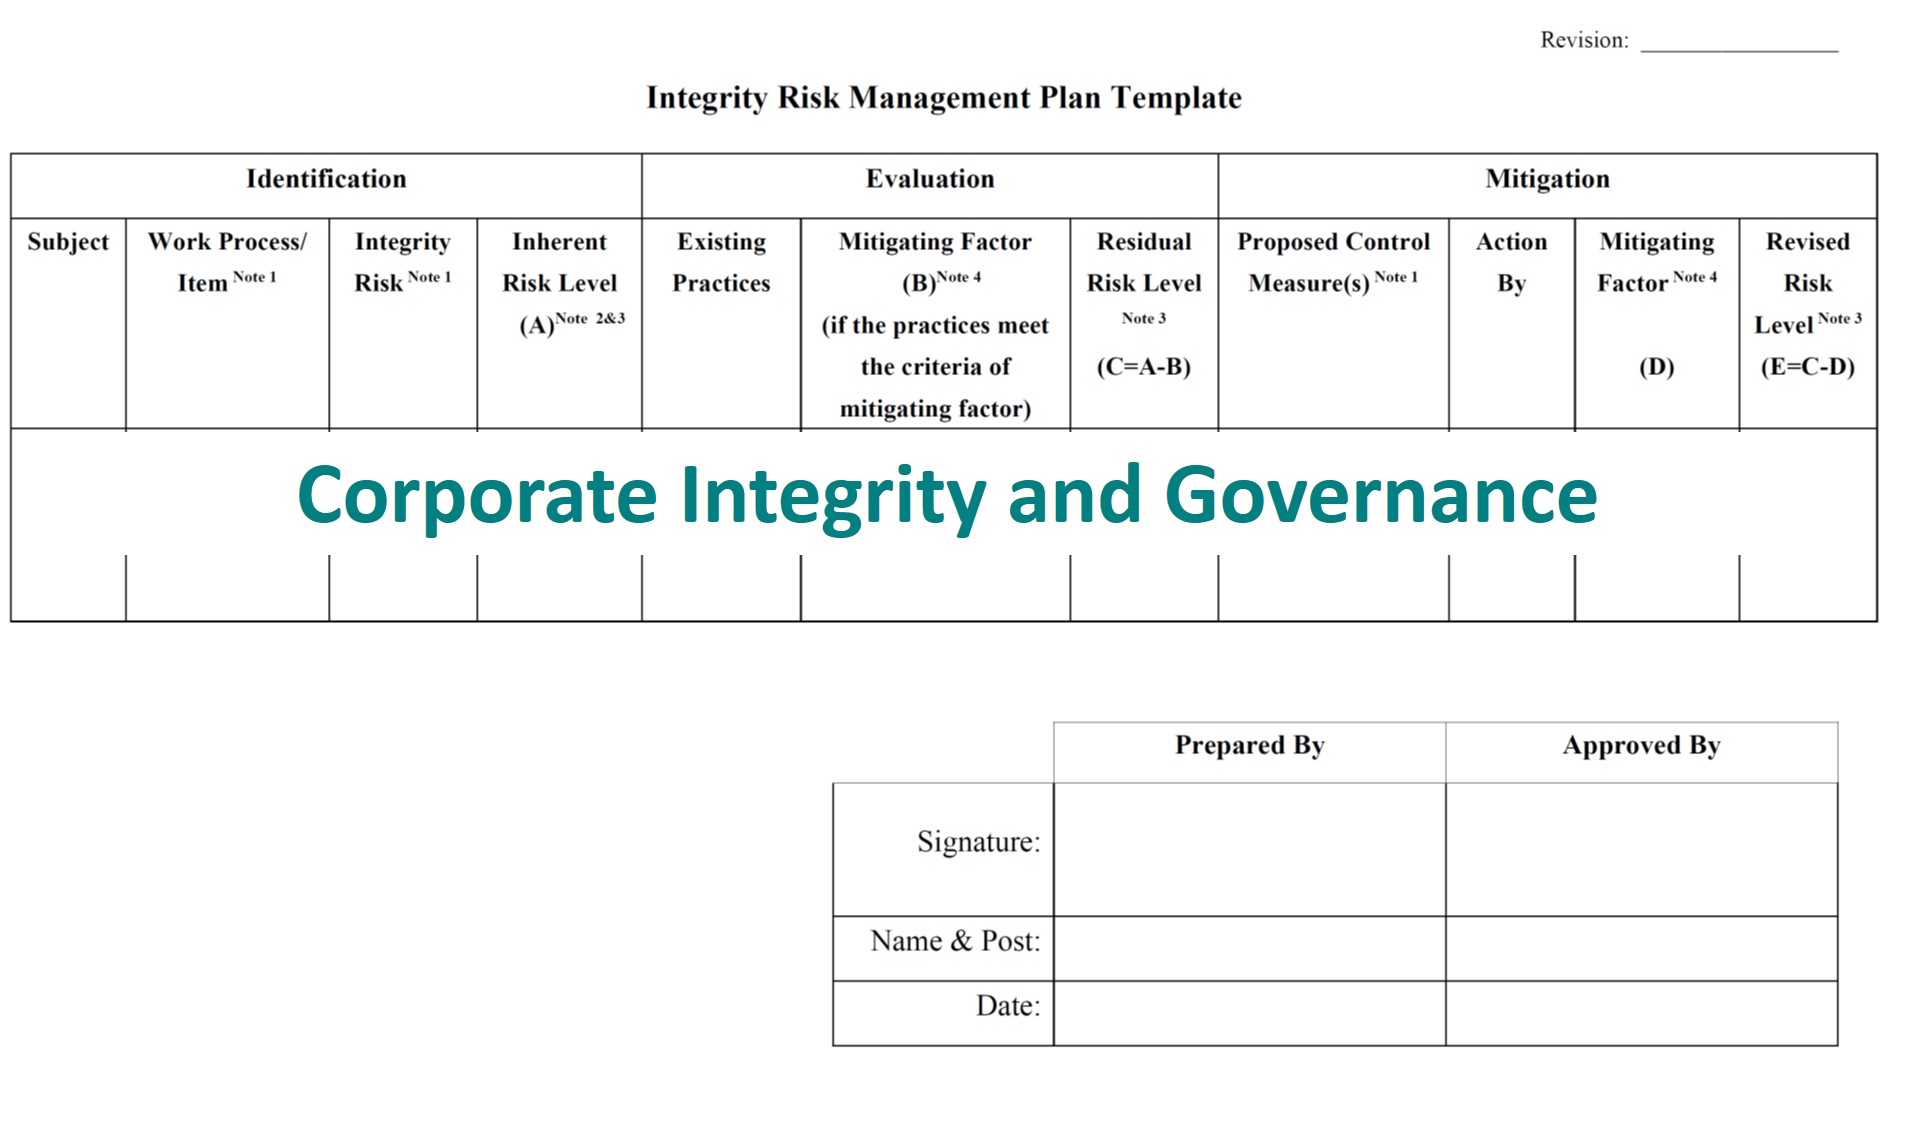 Integrity Risk Management on Corporate Integrity and Governance